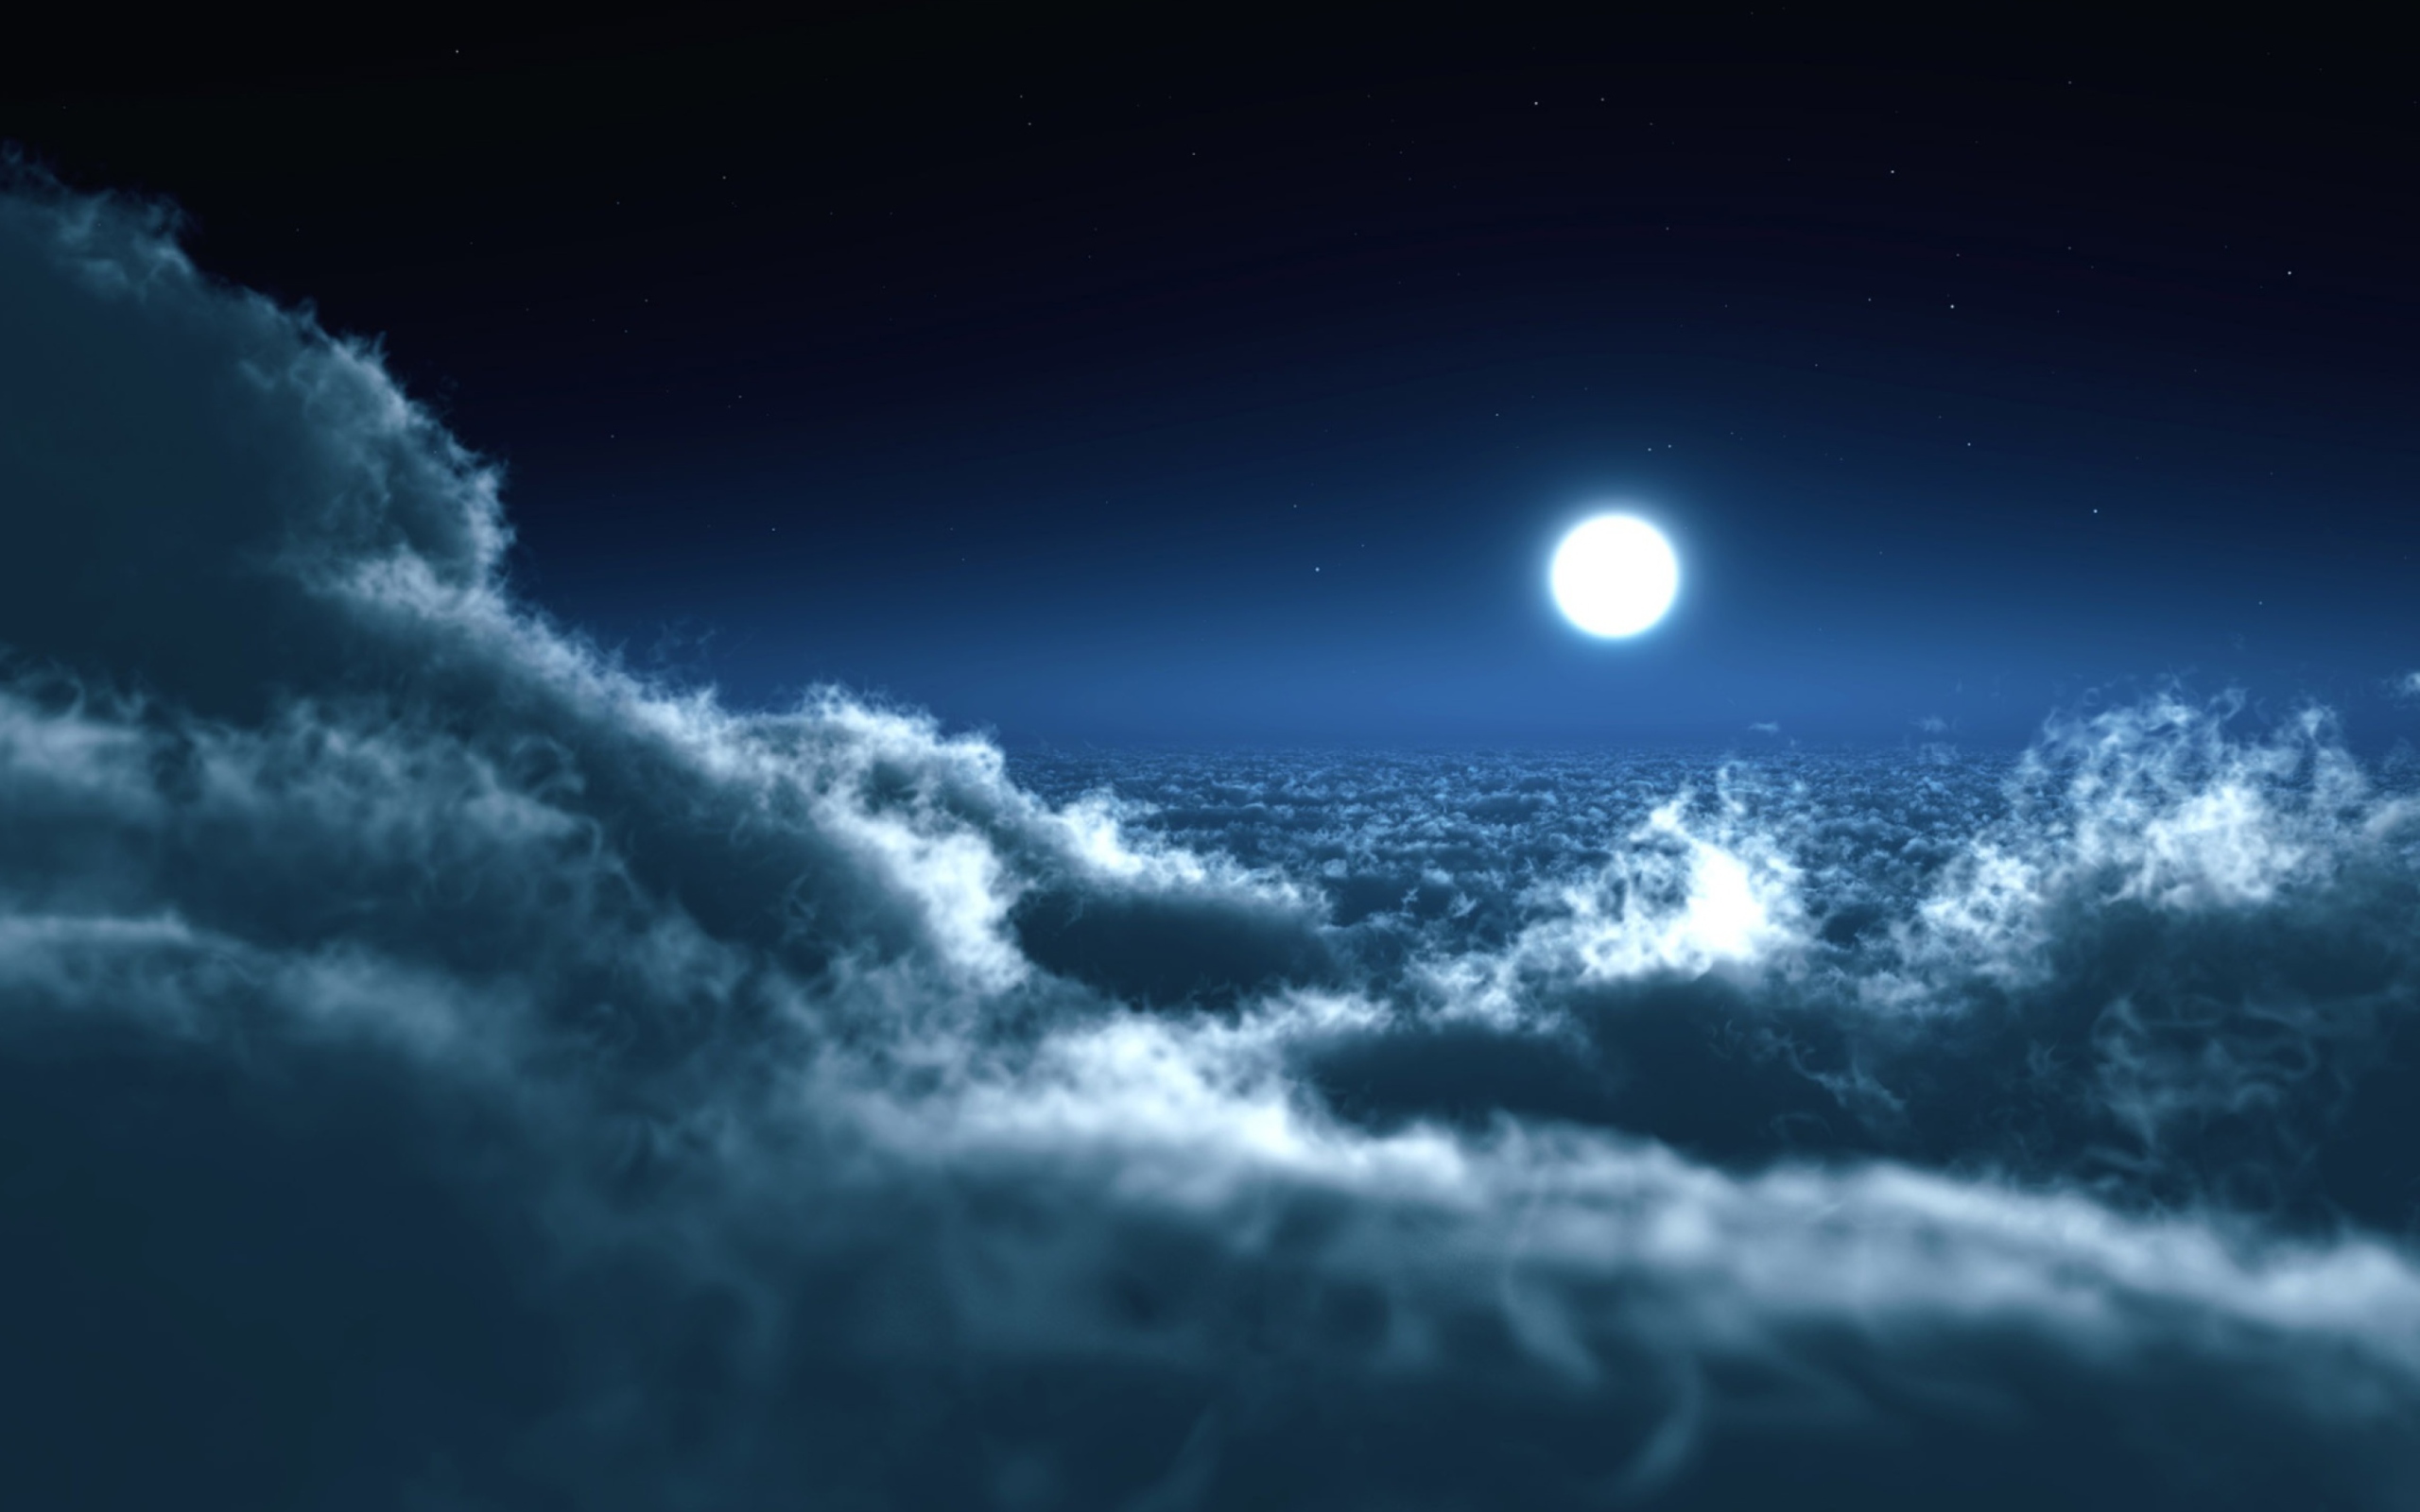 Moon Over Clouds wallpaper 2560x1600